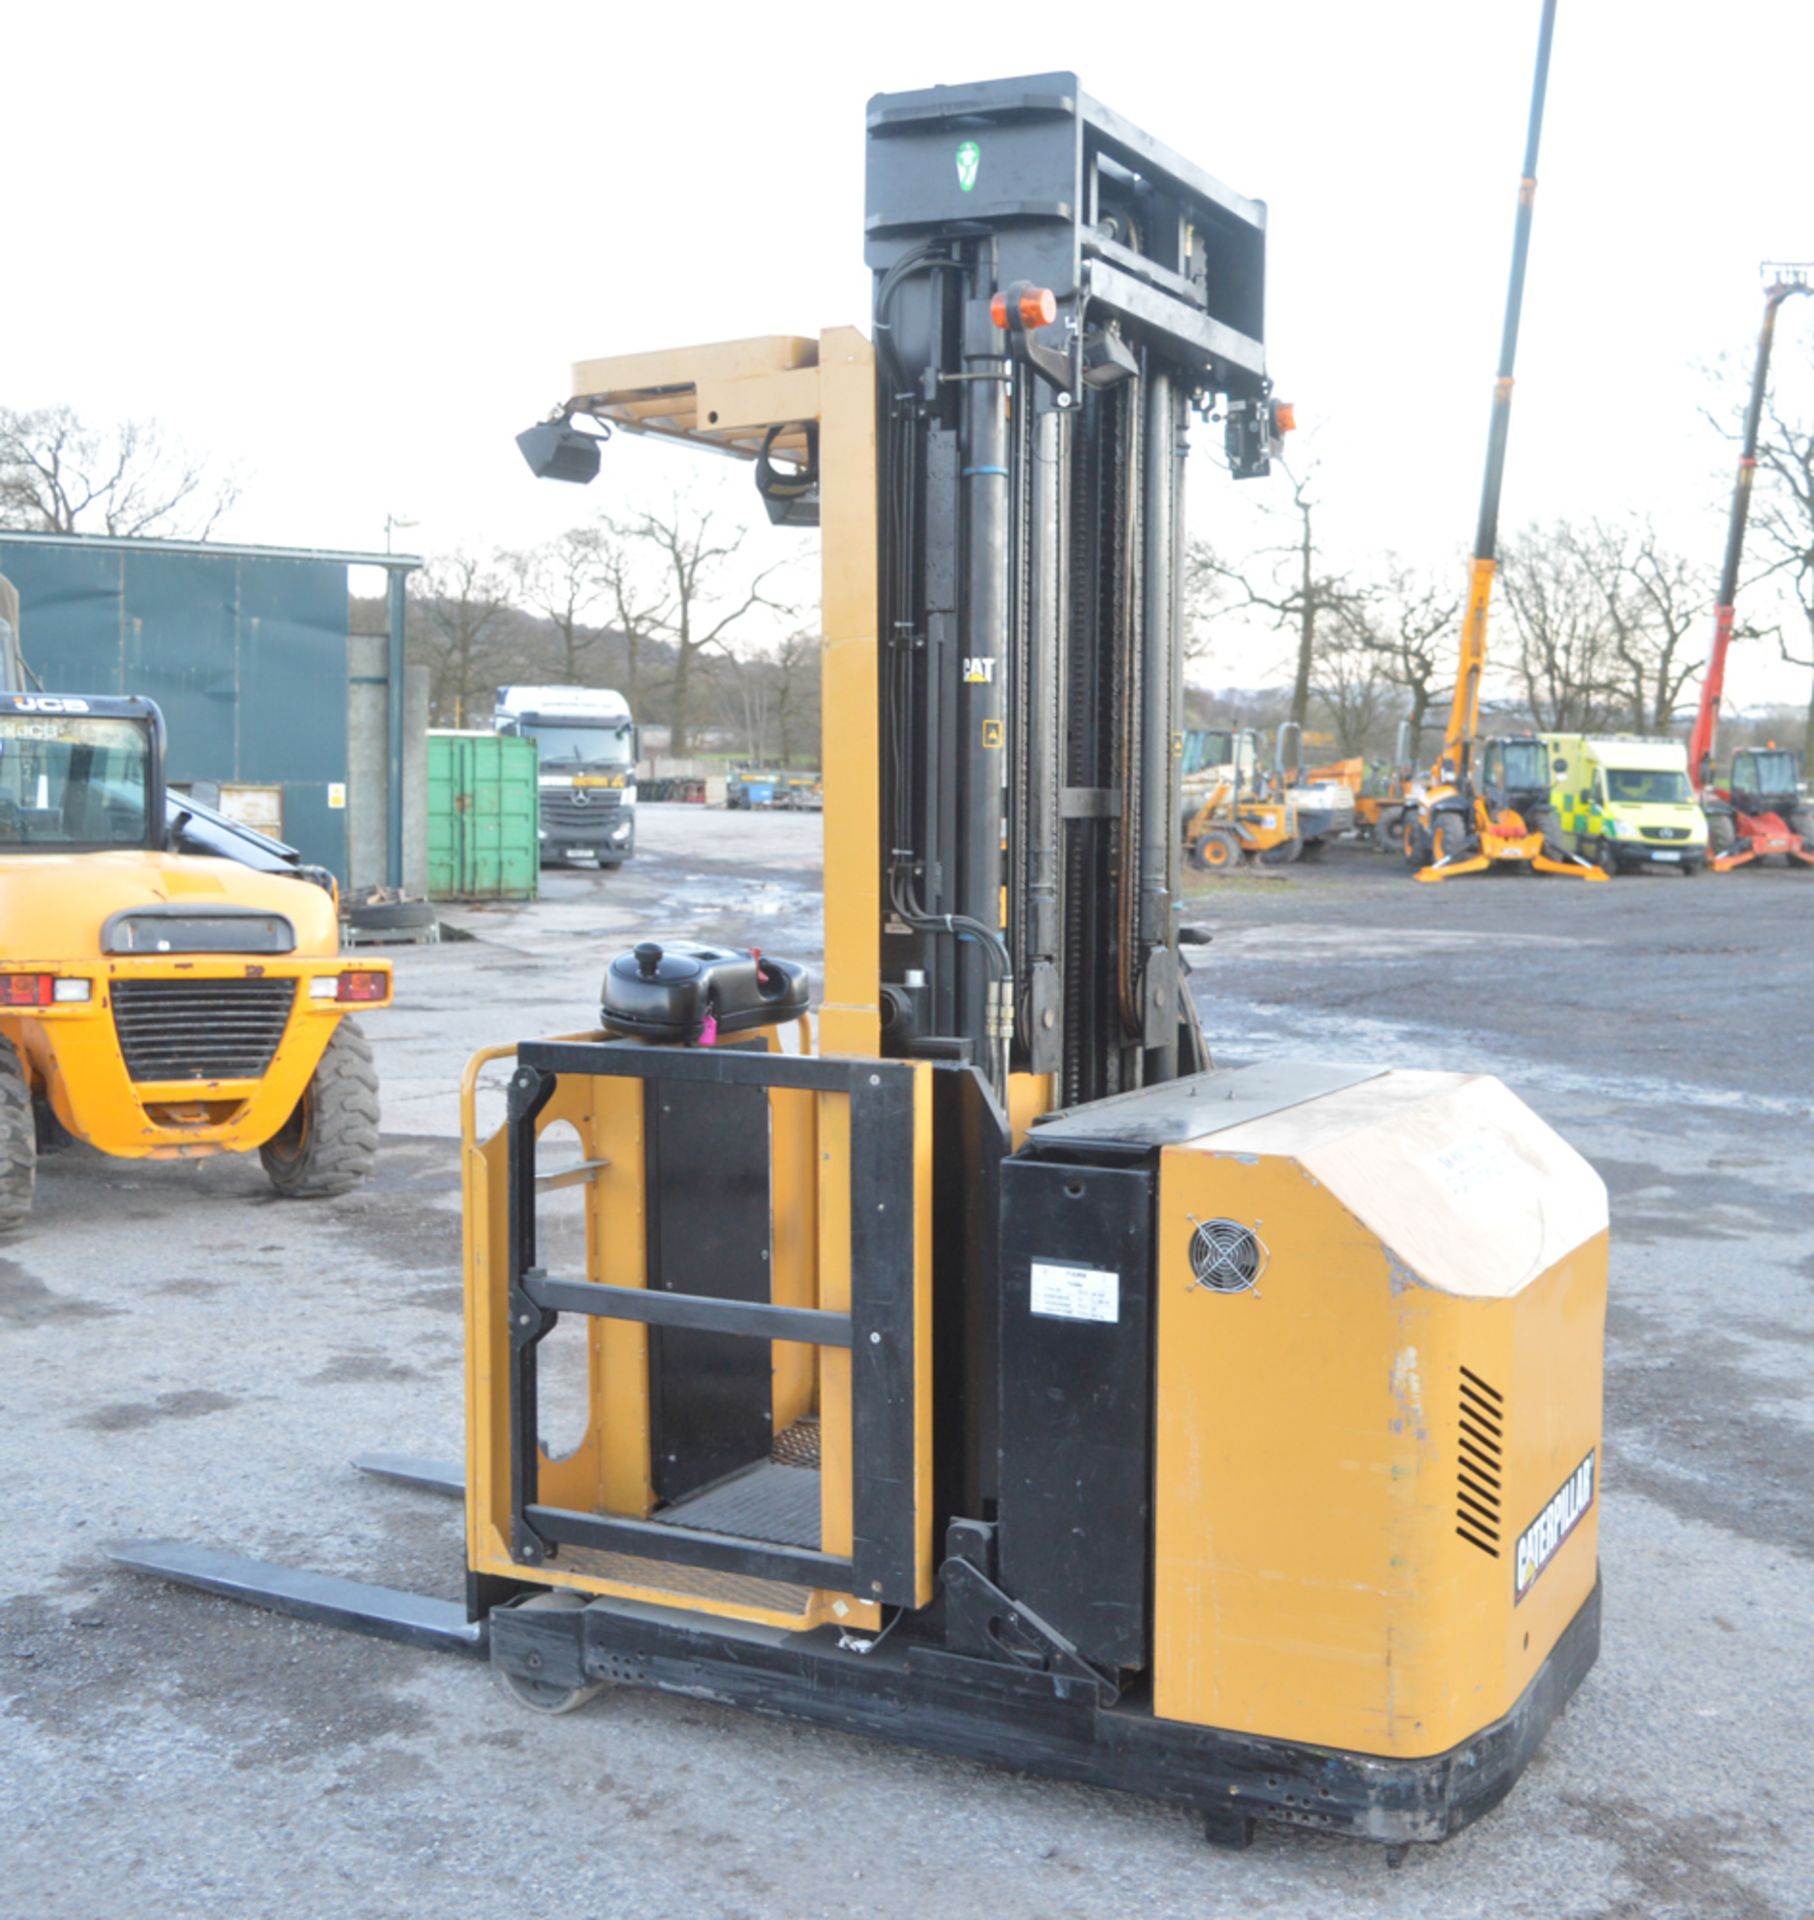 Caterpillar NOH08K battery electric high level order picker fork lift truck S/N: 1000346 Recorded - Image 3 of 6